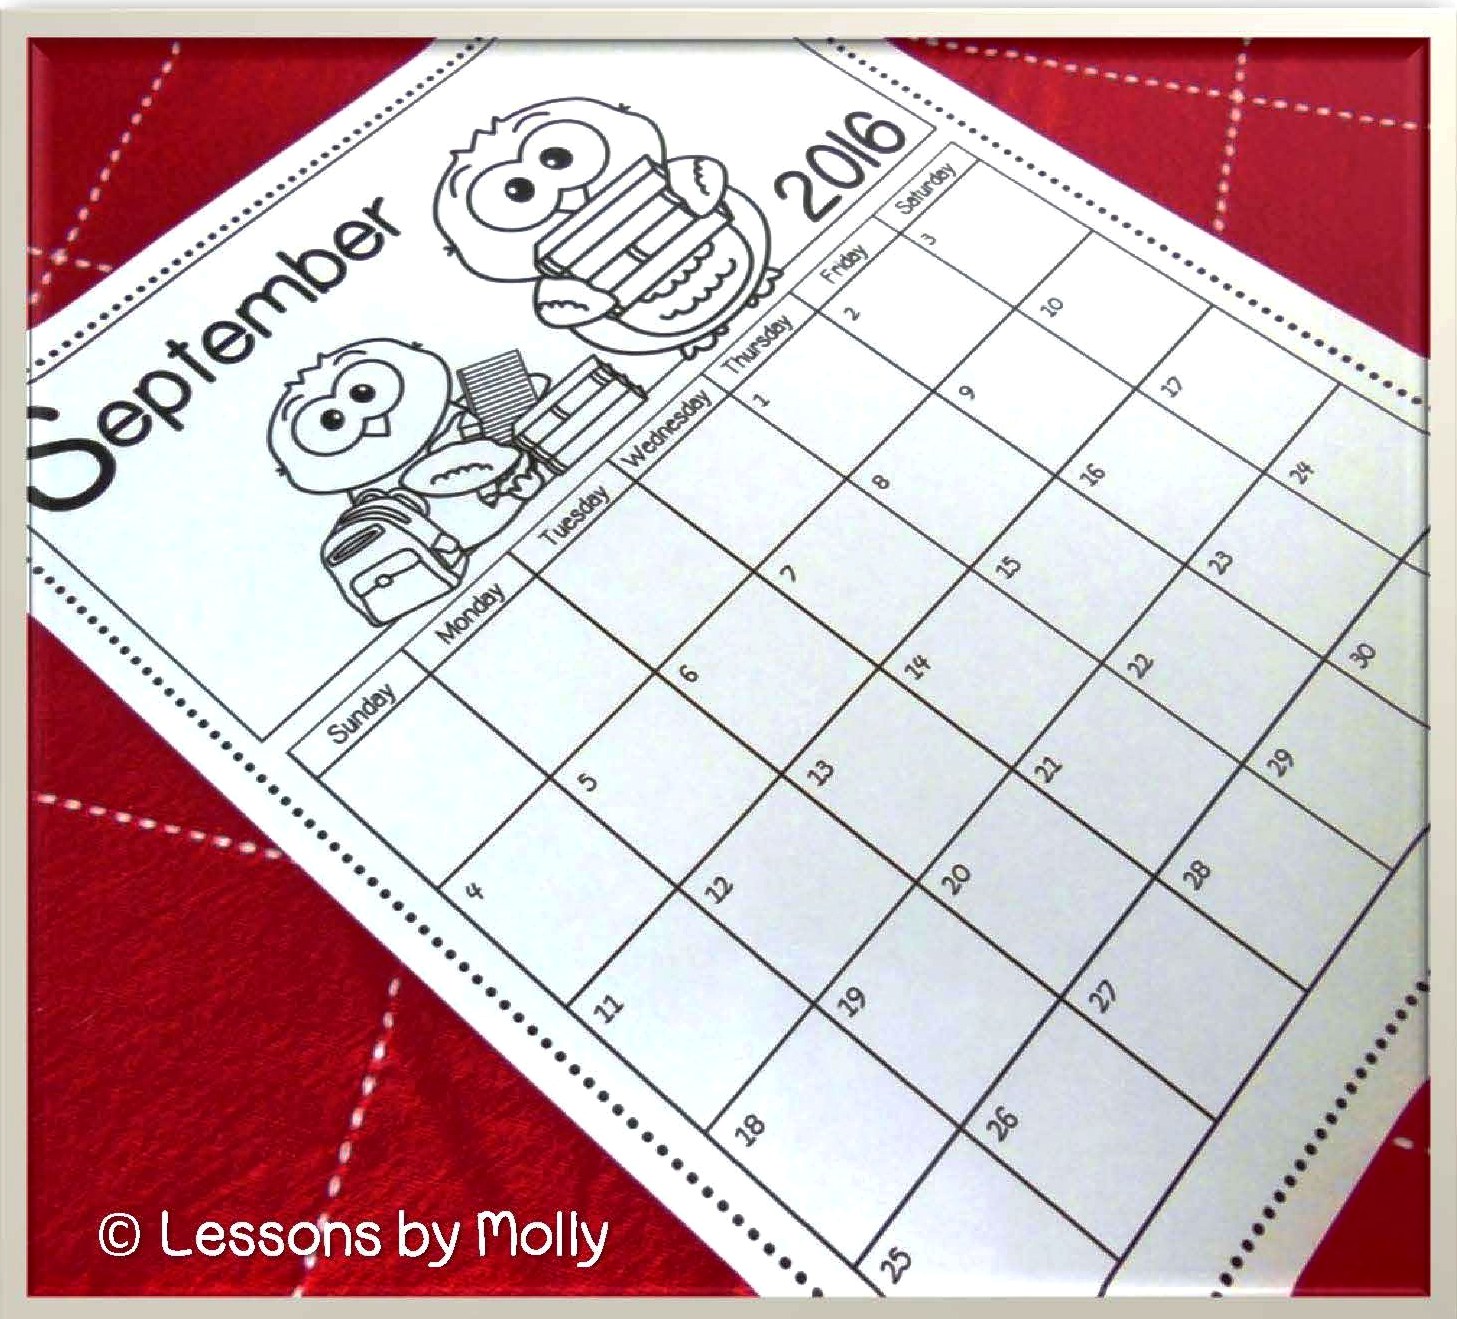 Lessons By Molly Free School Calendar